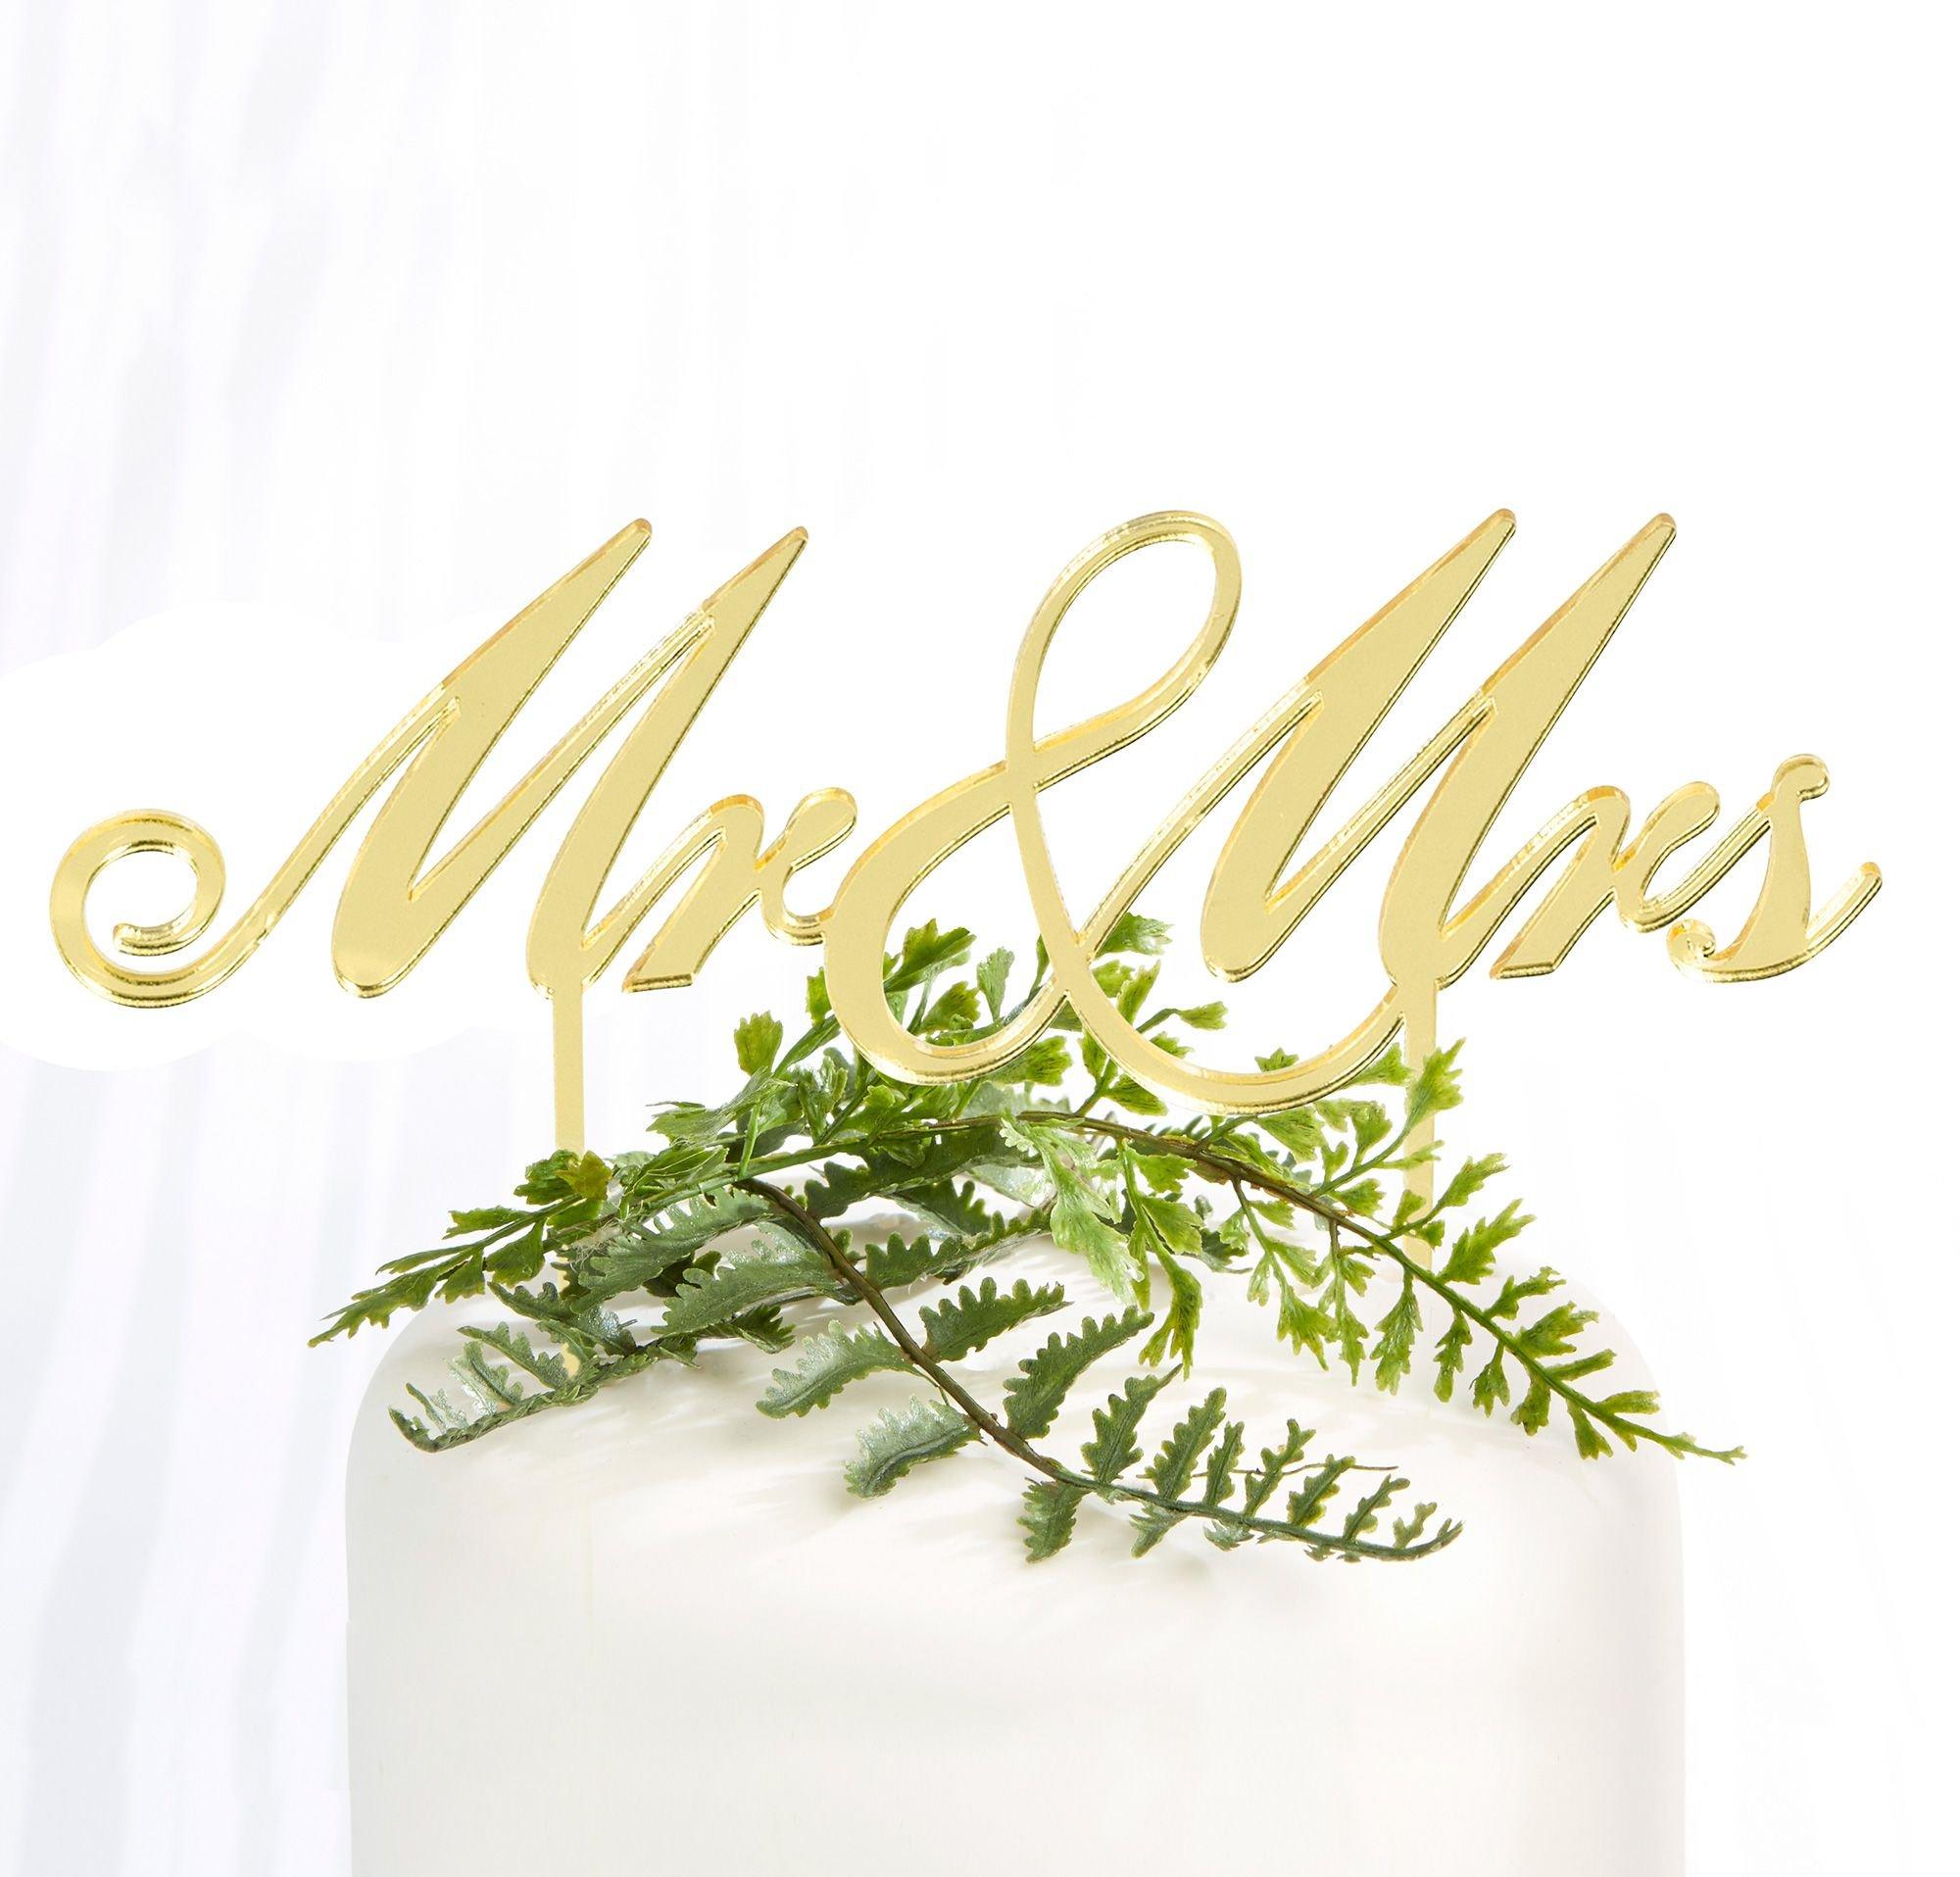 Gold Acrylic Cake Topper with Flower Design Happy Birthday Cake Decoration  Supplies for Kid Adult